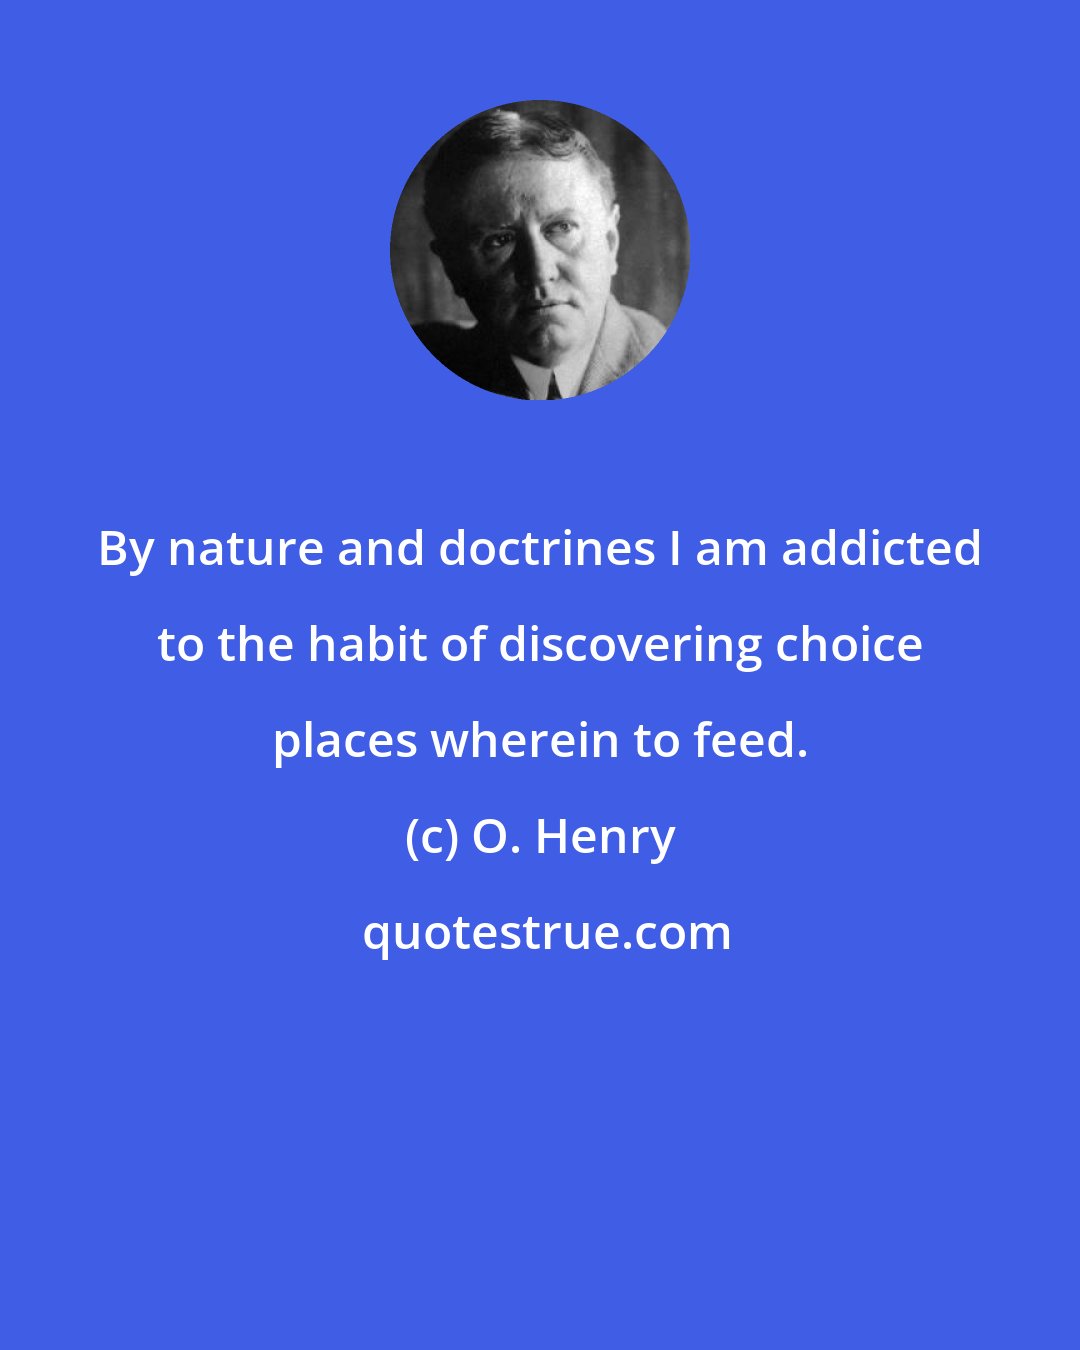 O. Henry: By nature and doctrines I am addicted to the habit of discovering choice places wherein to feed.